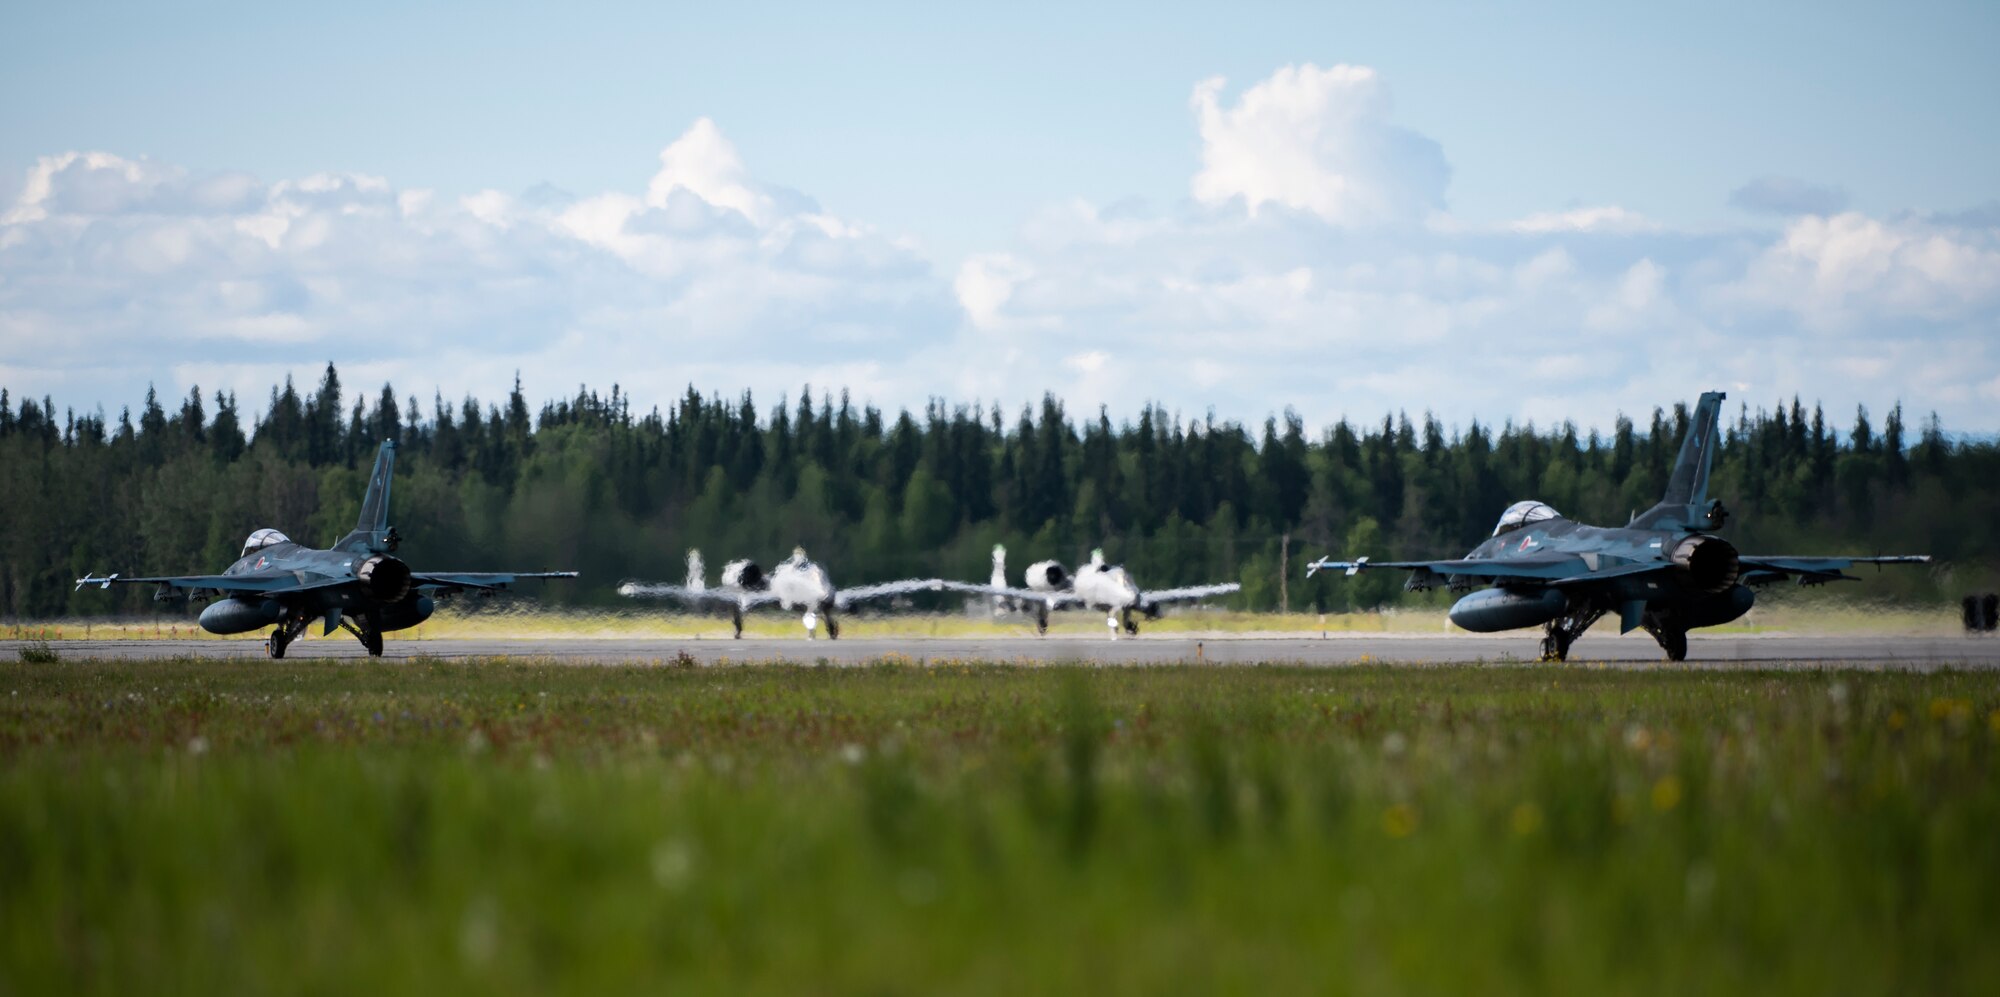 Japan Air Self-Defense Force F-2s from the 3rd Air Wing, Misawa Air Base, Japan, taxi down the runway at Eielson Air Force Base, Alaska, June 10, 2019. The 3rd Wing is participating in Red Flag-Alaska, a large-scale training exercise, with units and allied nations’ air forces from around the Pacific. (U.S. Air Force photo by Senior Airman Stefan Alvarez